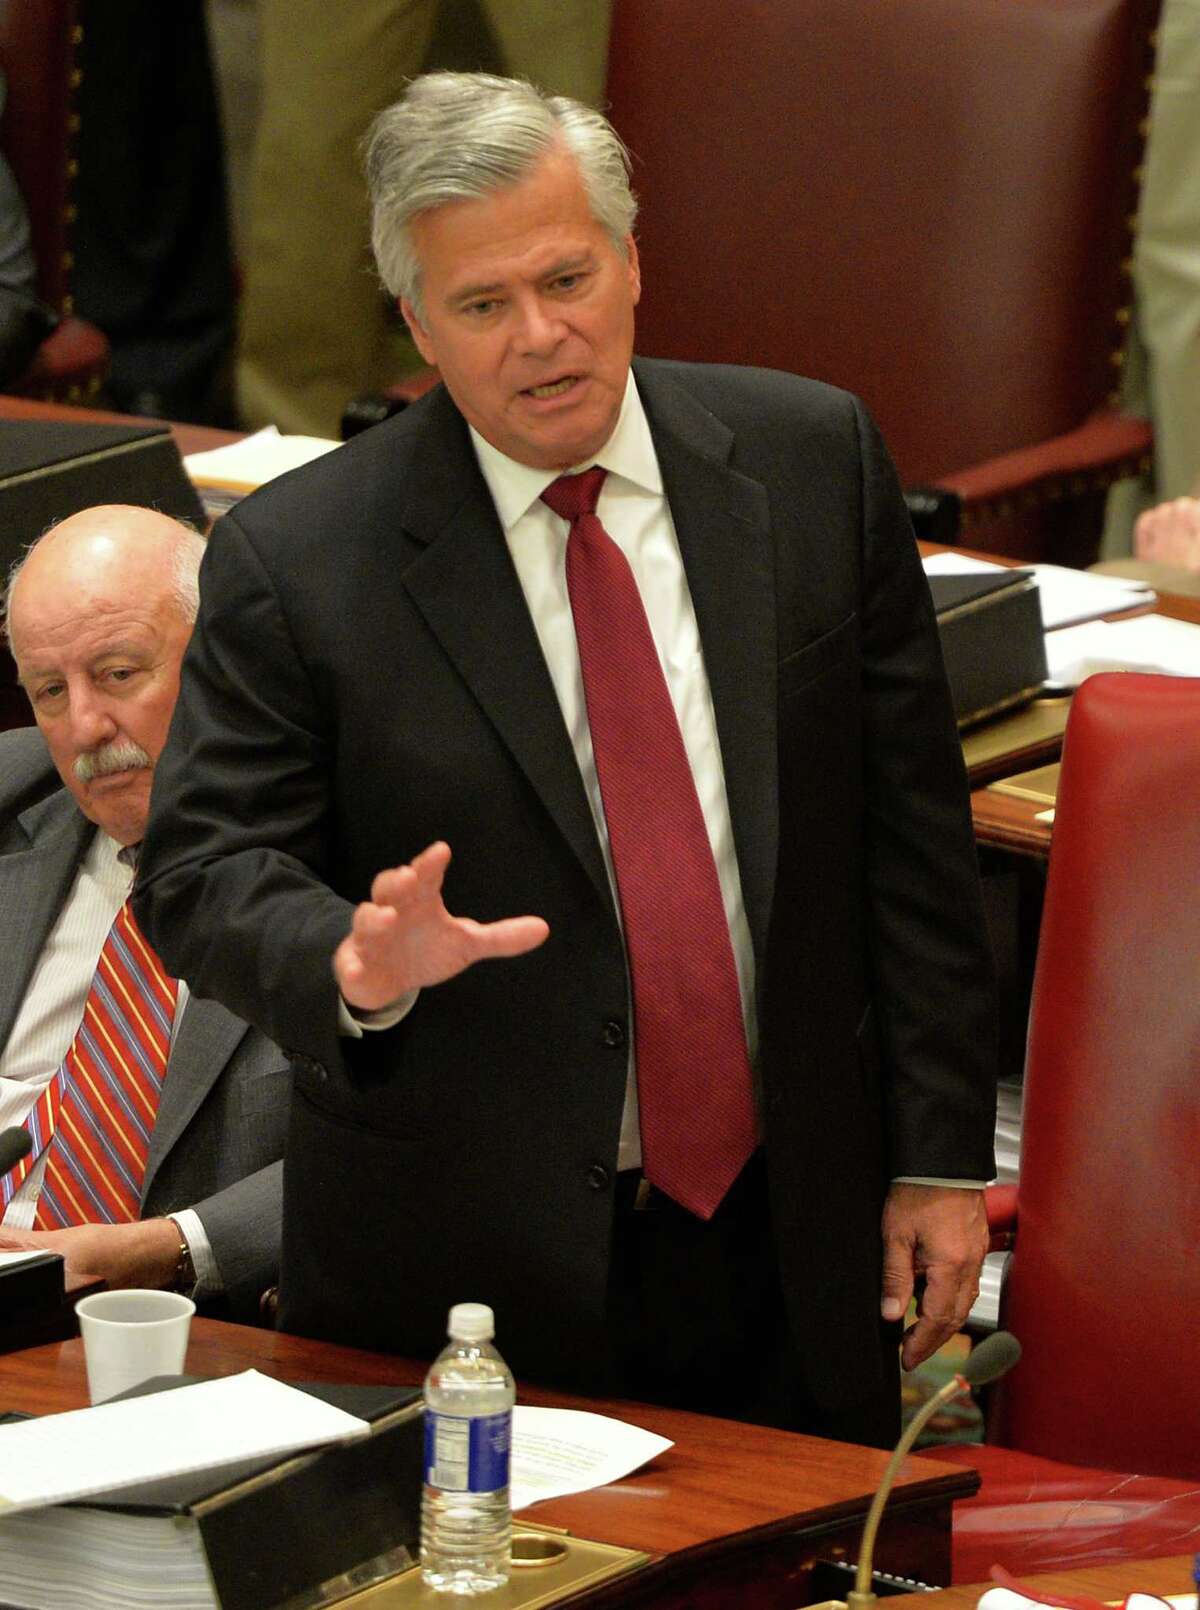 Senate Republican leader Dean Skelos speaks on the Senate floor Friday afternoon, June 20, 2014, at the Capitol in Albany, N.Y. (Skip Dickstein / Times Union archive)